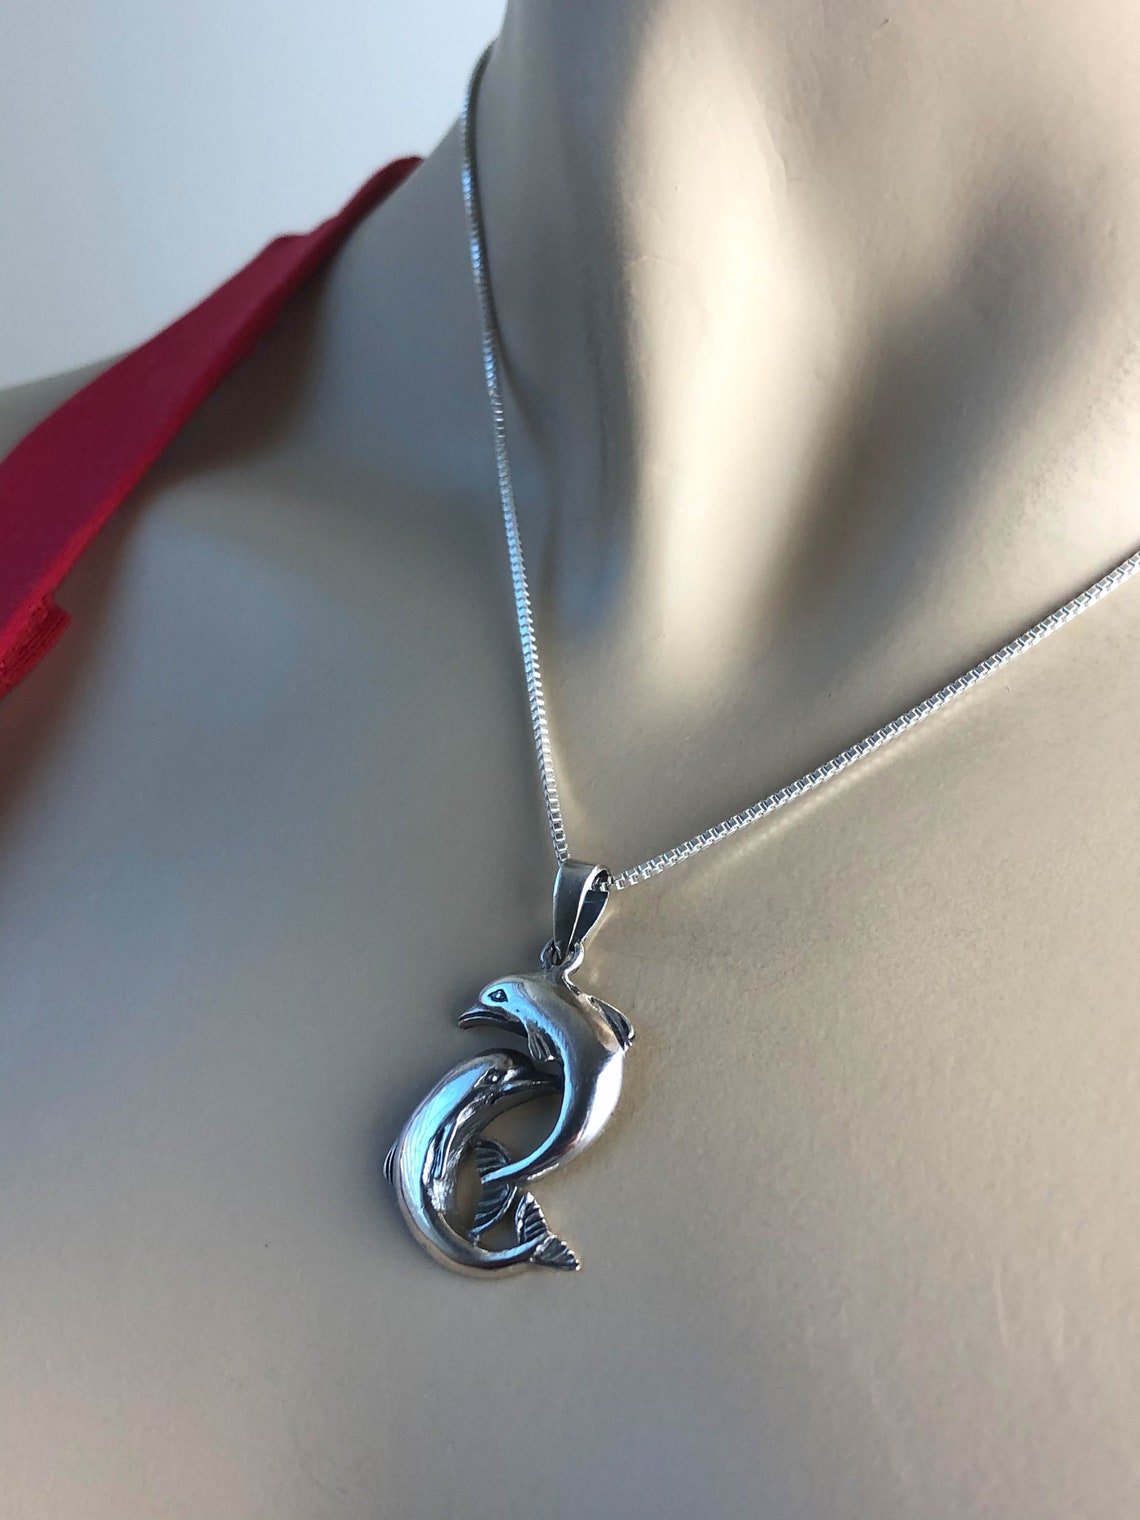 Loving Dolphin Necklace Sterling Silver Dolphin Pendant Good - Etsy